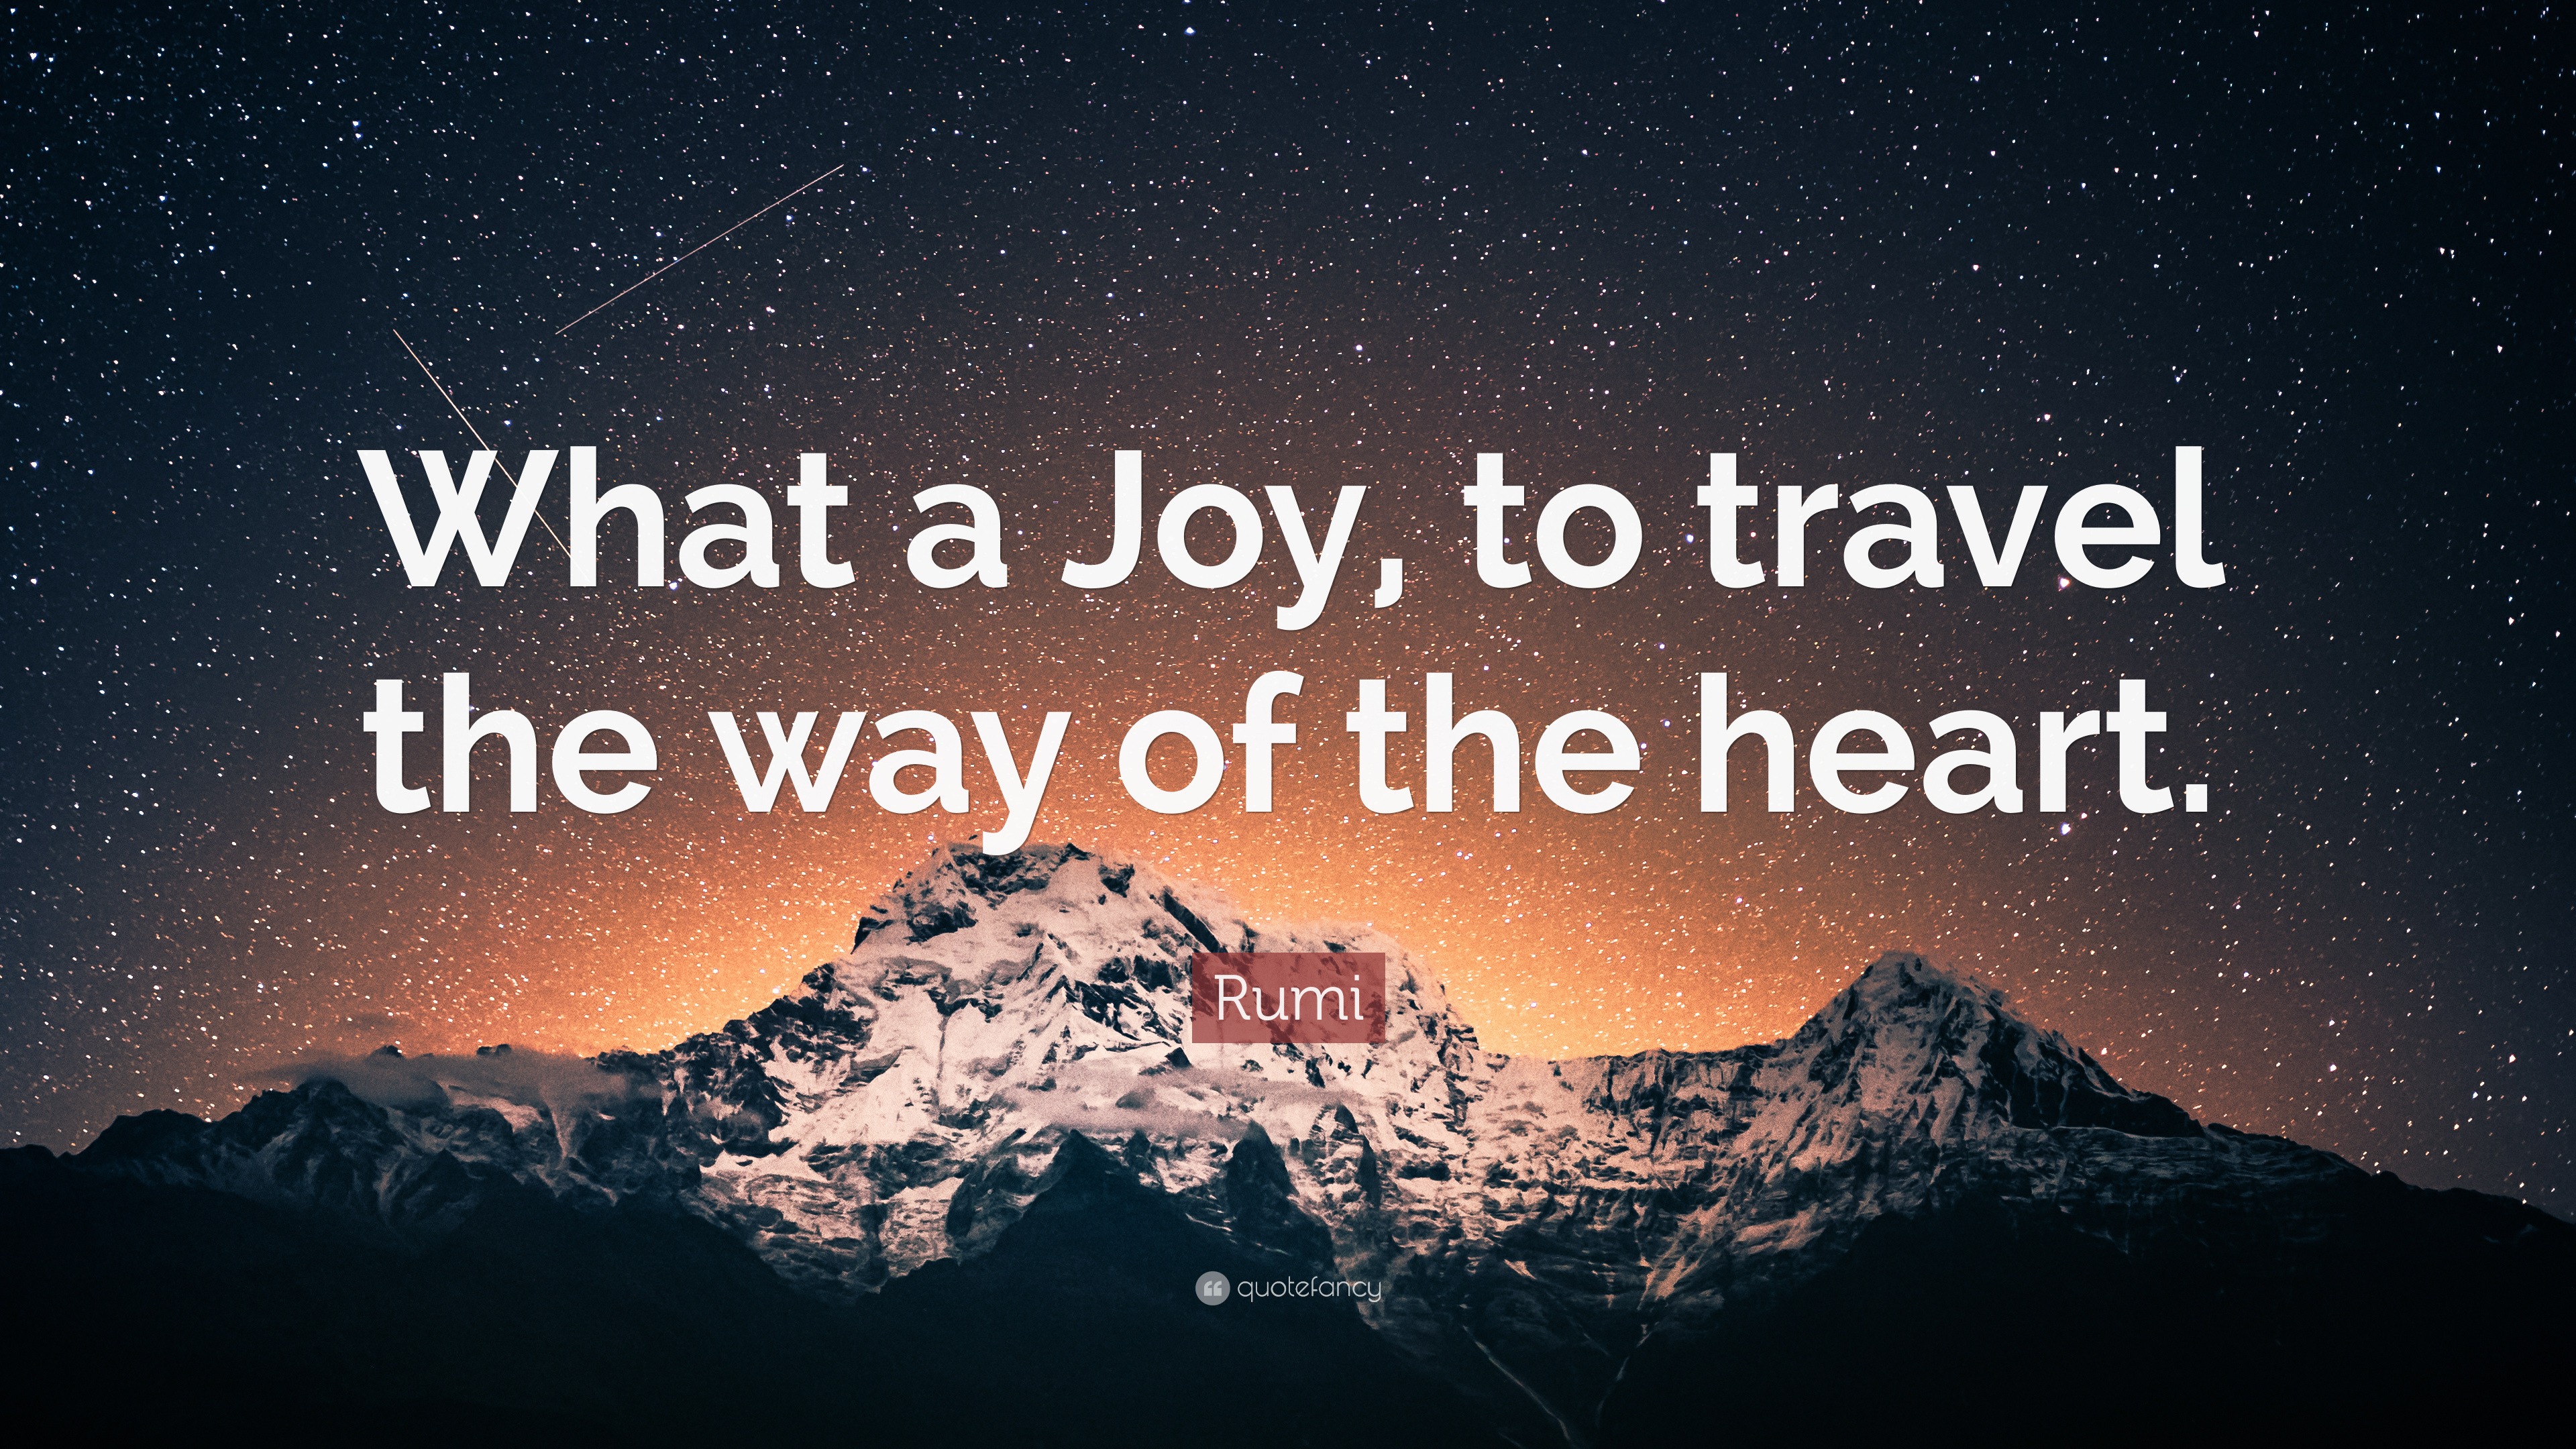 rumi quotes about travel